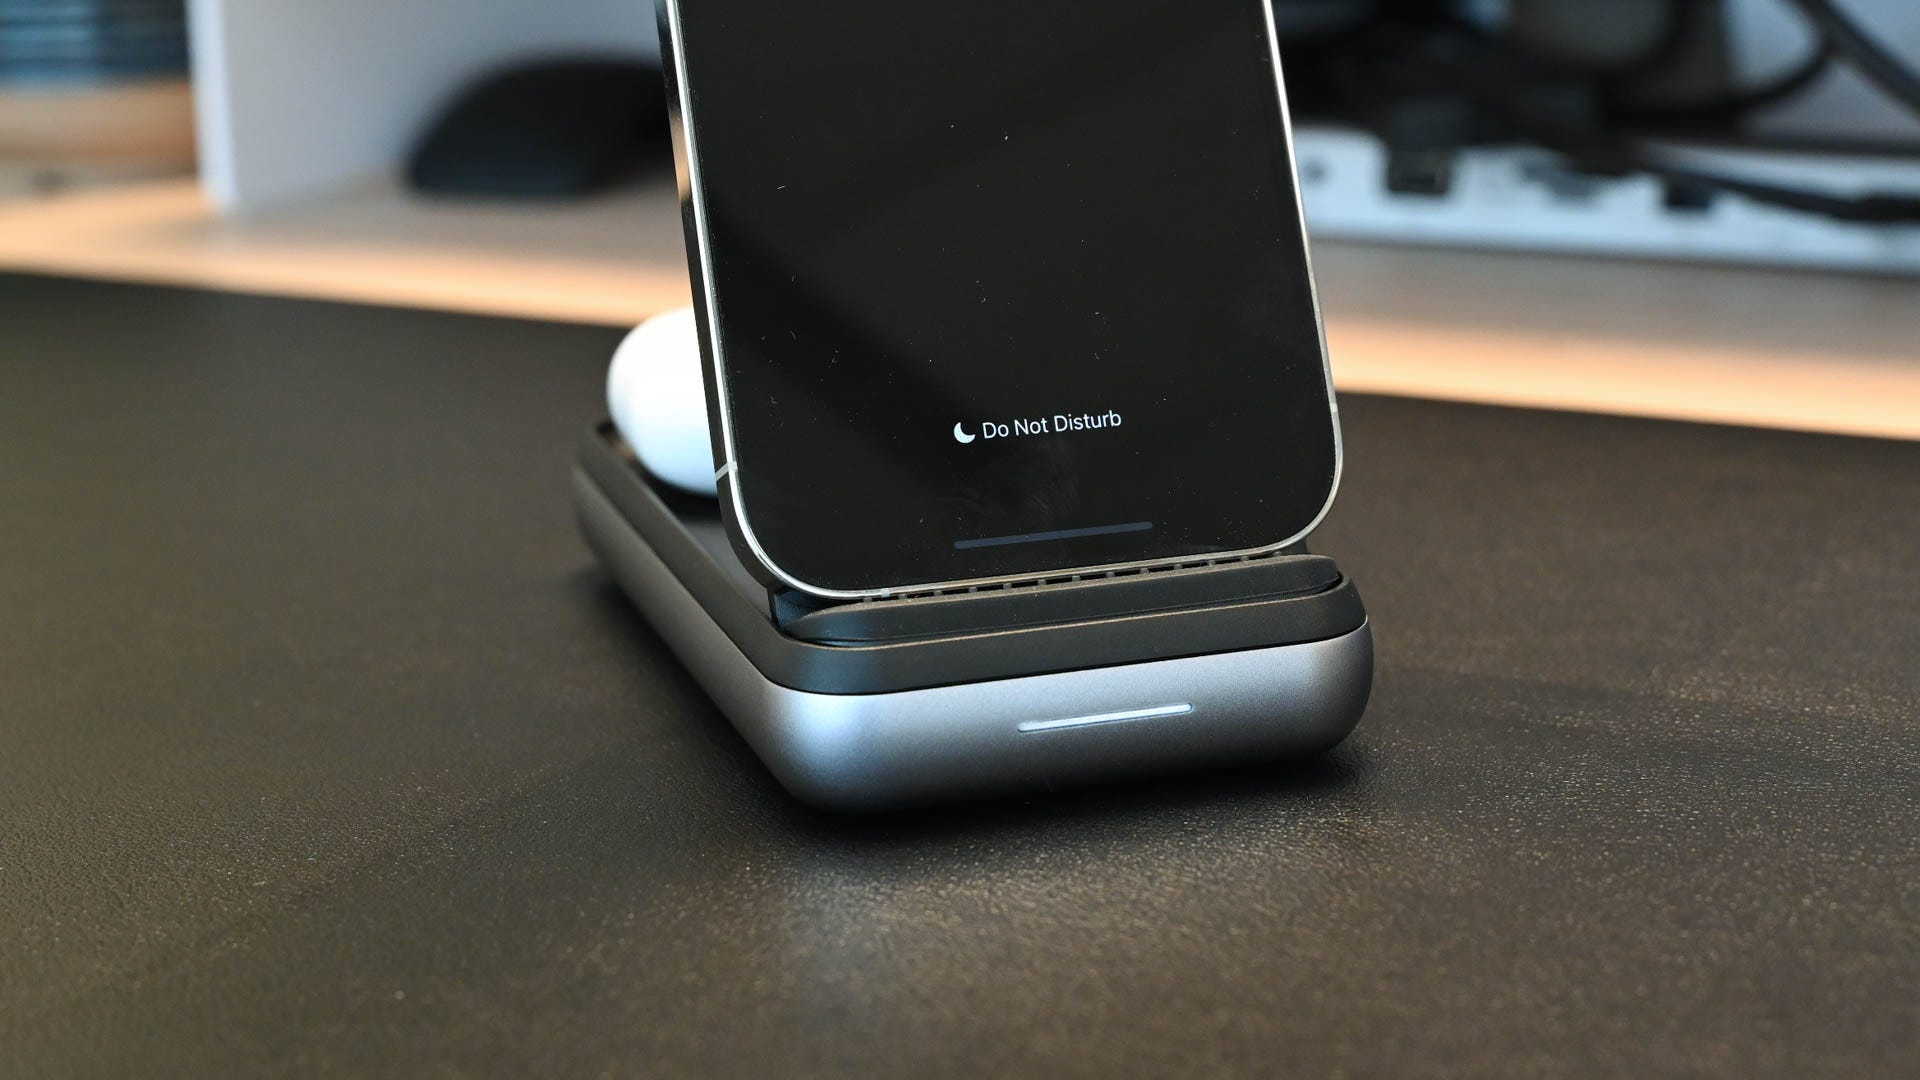 Indicator light on the Satechi Duo Wireless Charger Power Stand